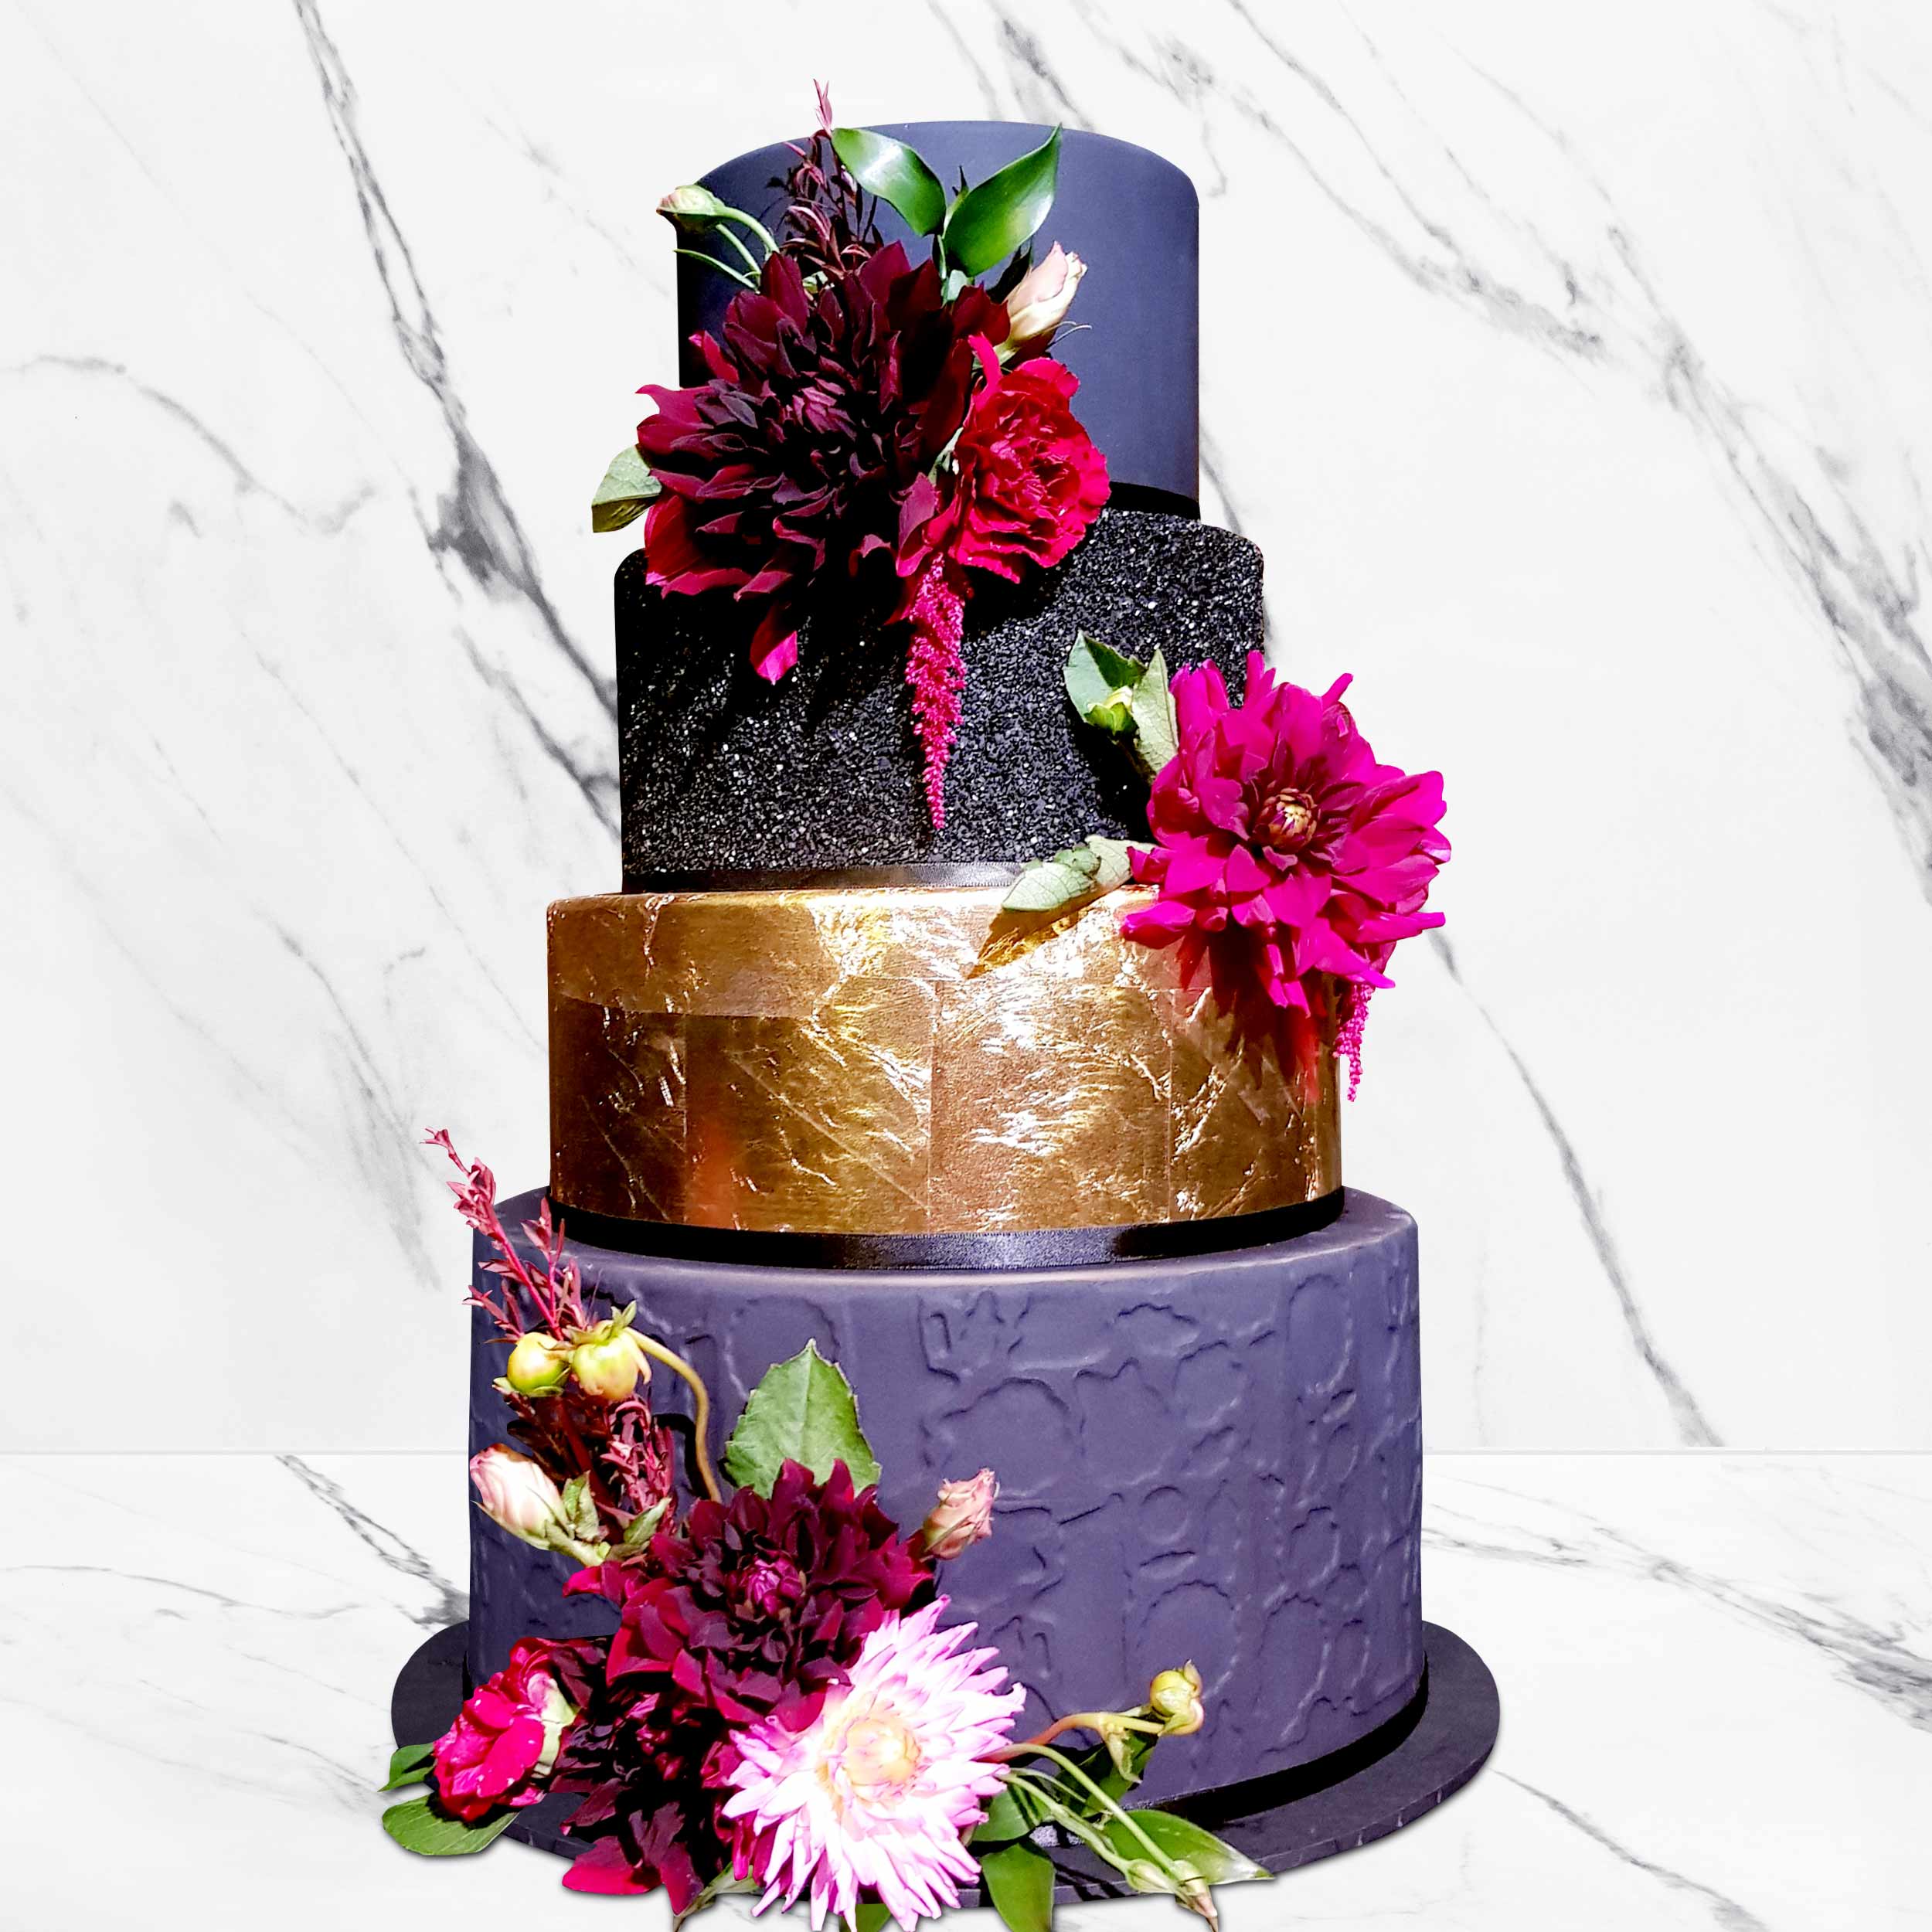 Black fondant covered cake with 23ct gold leaf and black shimmer glitt –  Get Caked by Lisa